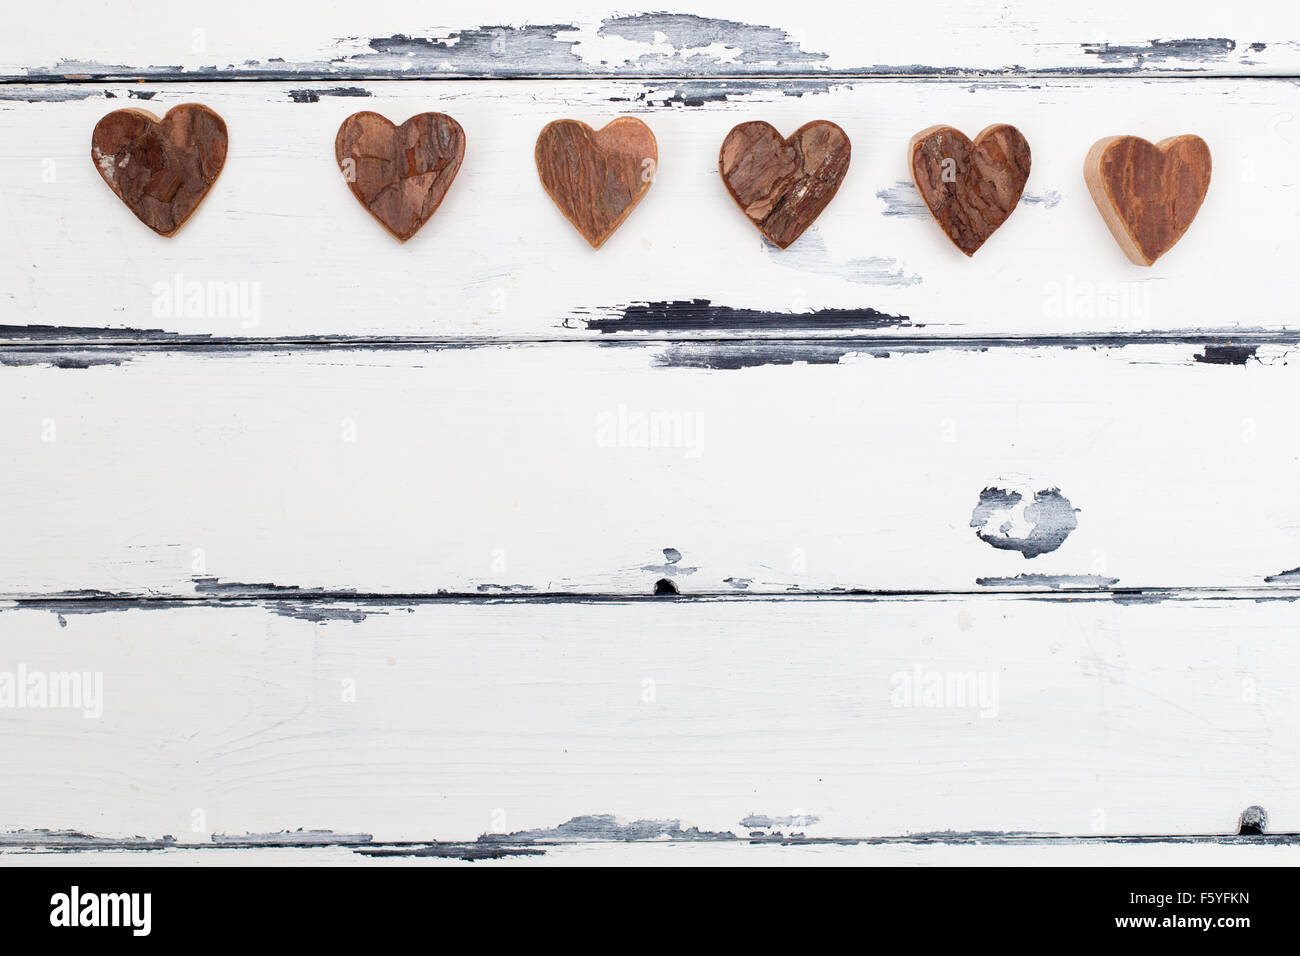 objects of bark shaped as hearts on vintage wooden background Stock Photo